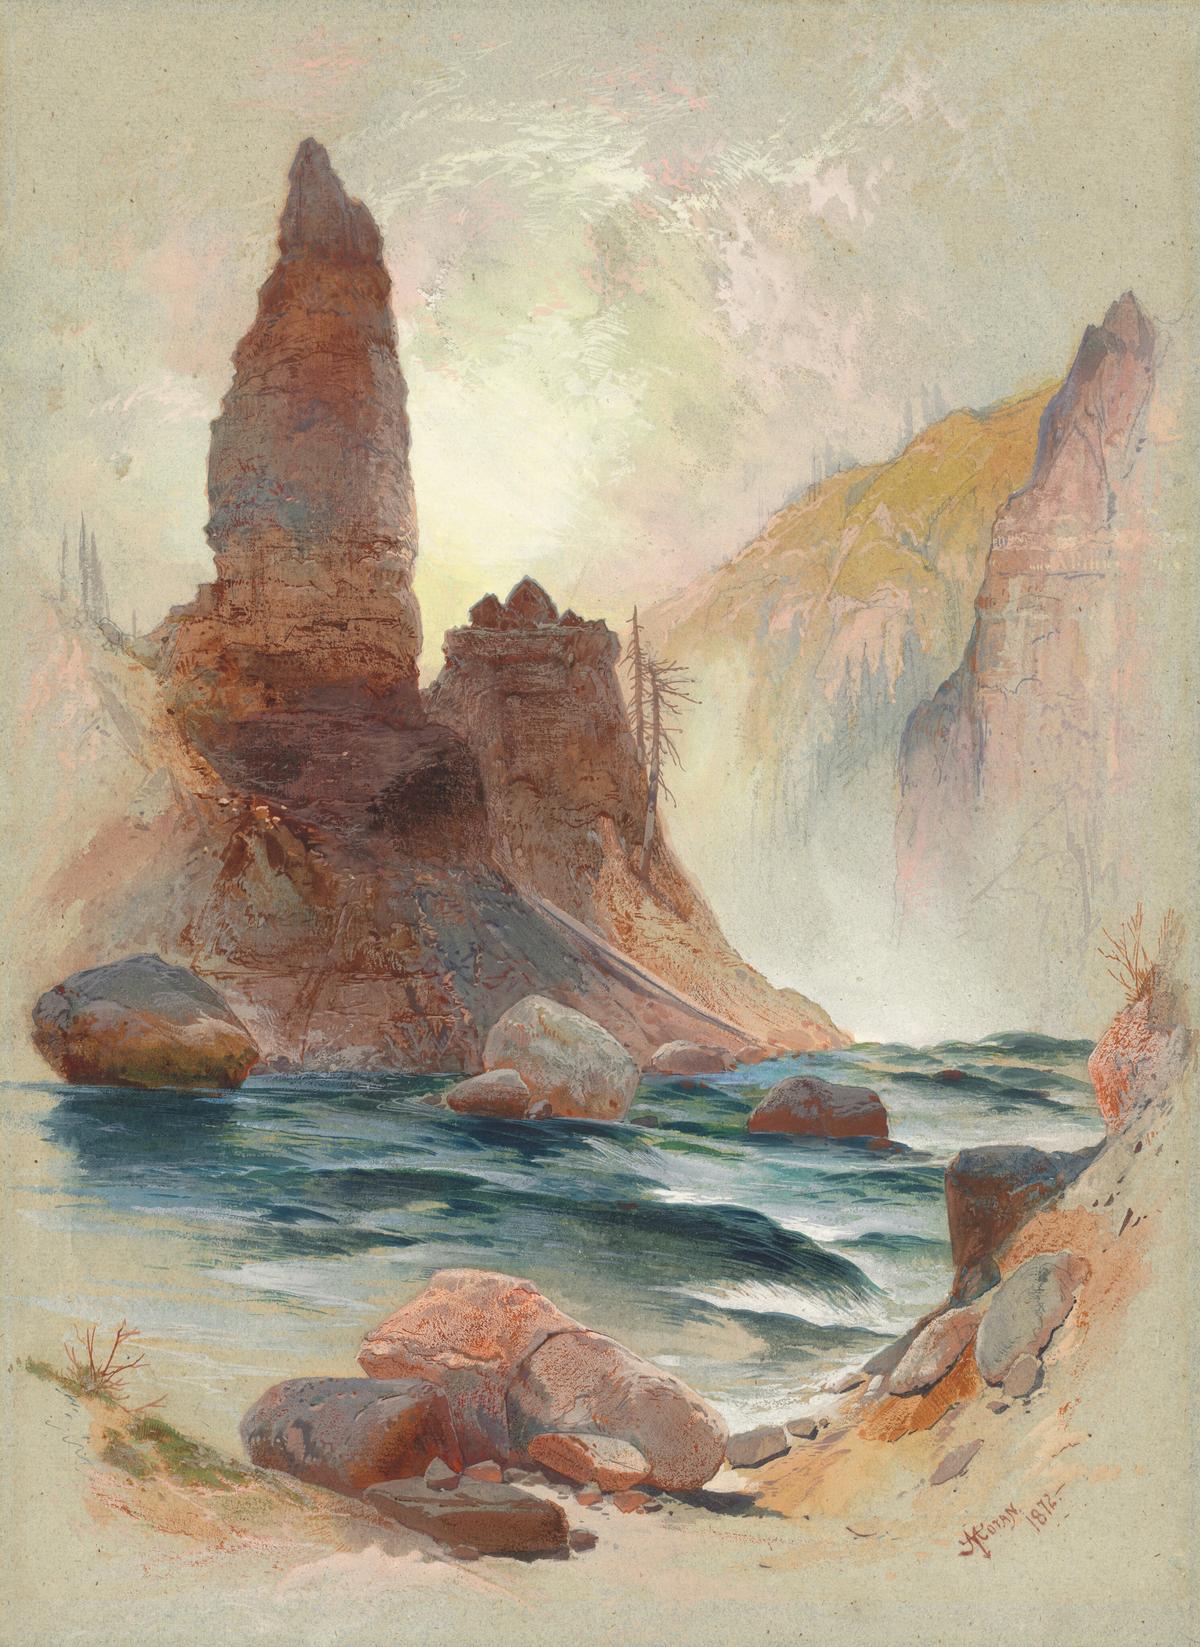 "Tower at Tower Falls, Yellowstone," 1872, by Thomas Moran. Watercolor and gouache over graphite on blue paper; 14.25 inches by 10.36 inches. Florian Carr Fund. National Gallery of Art. (Public domain)